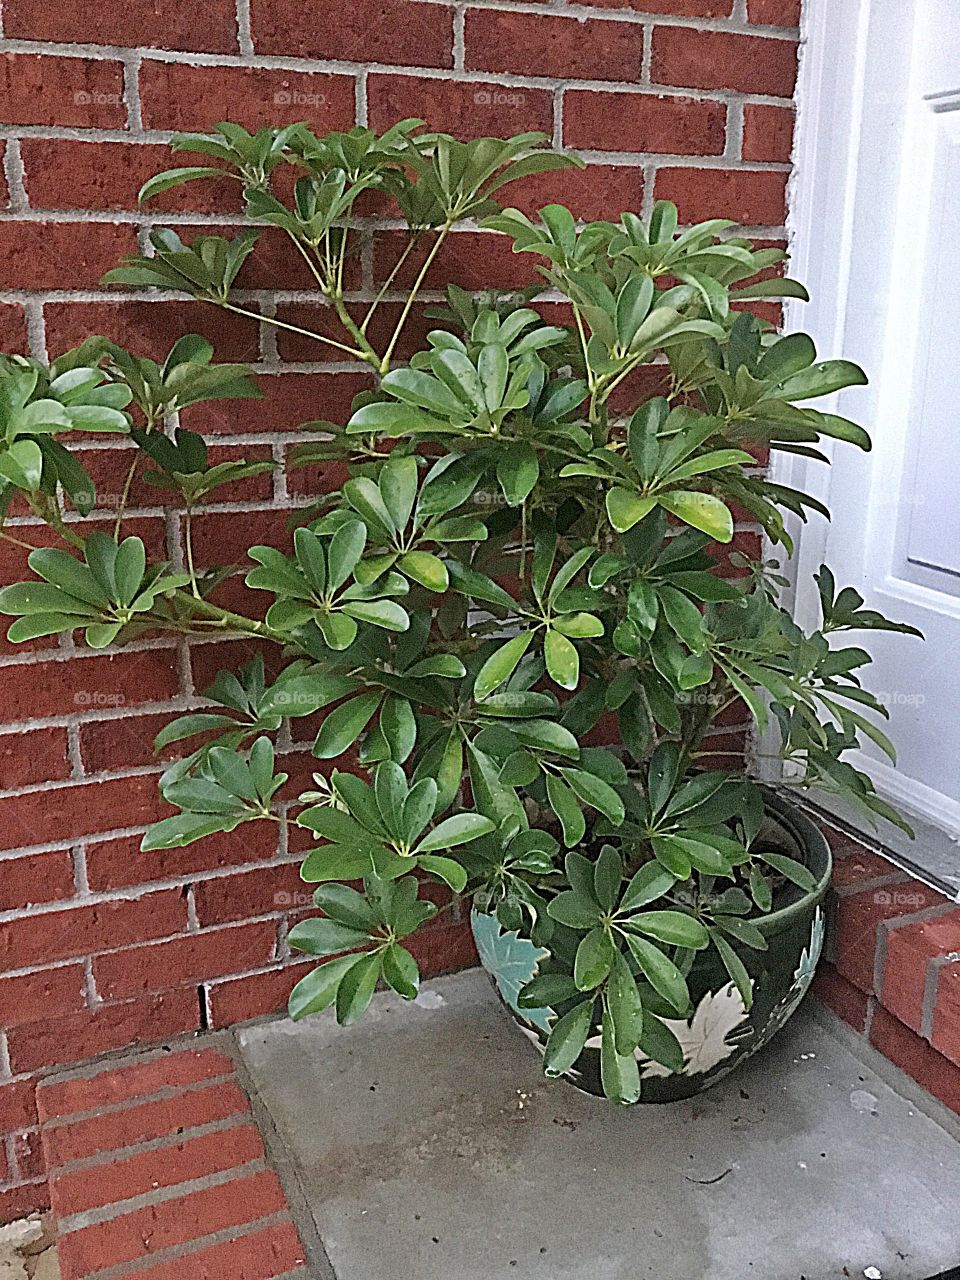 Crazy plant people - this plant can tolerate high temperatures and high humidity 